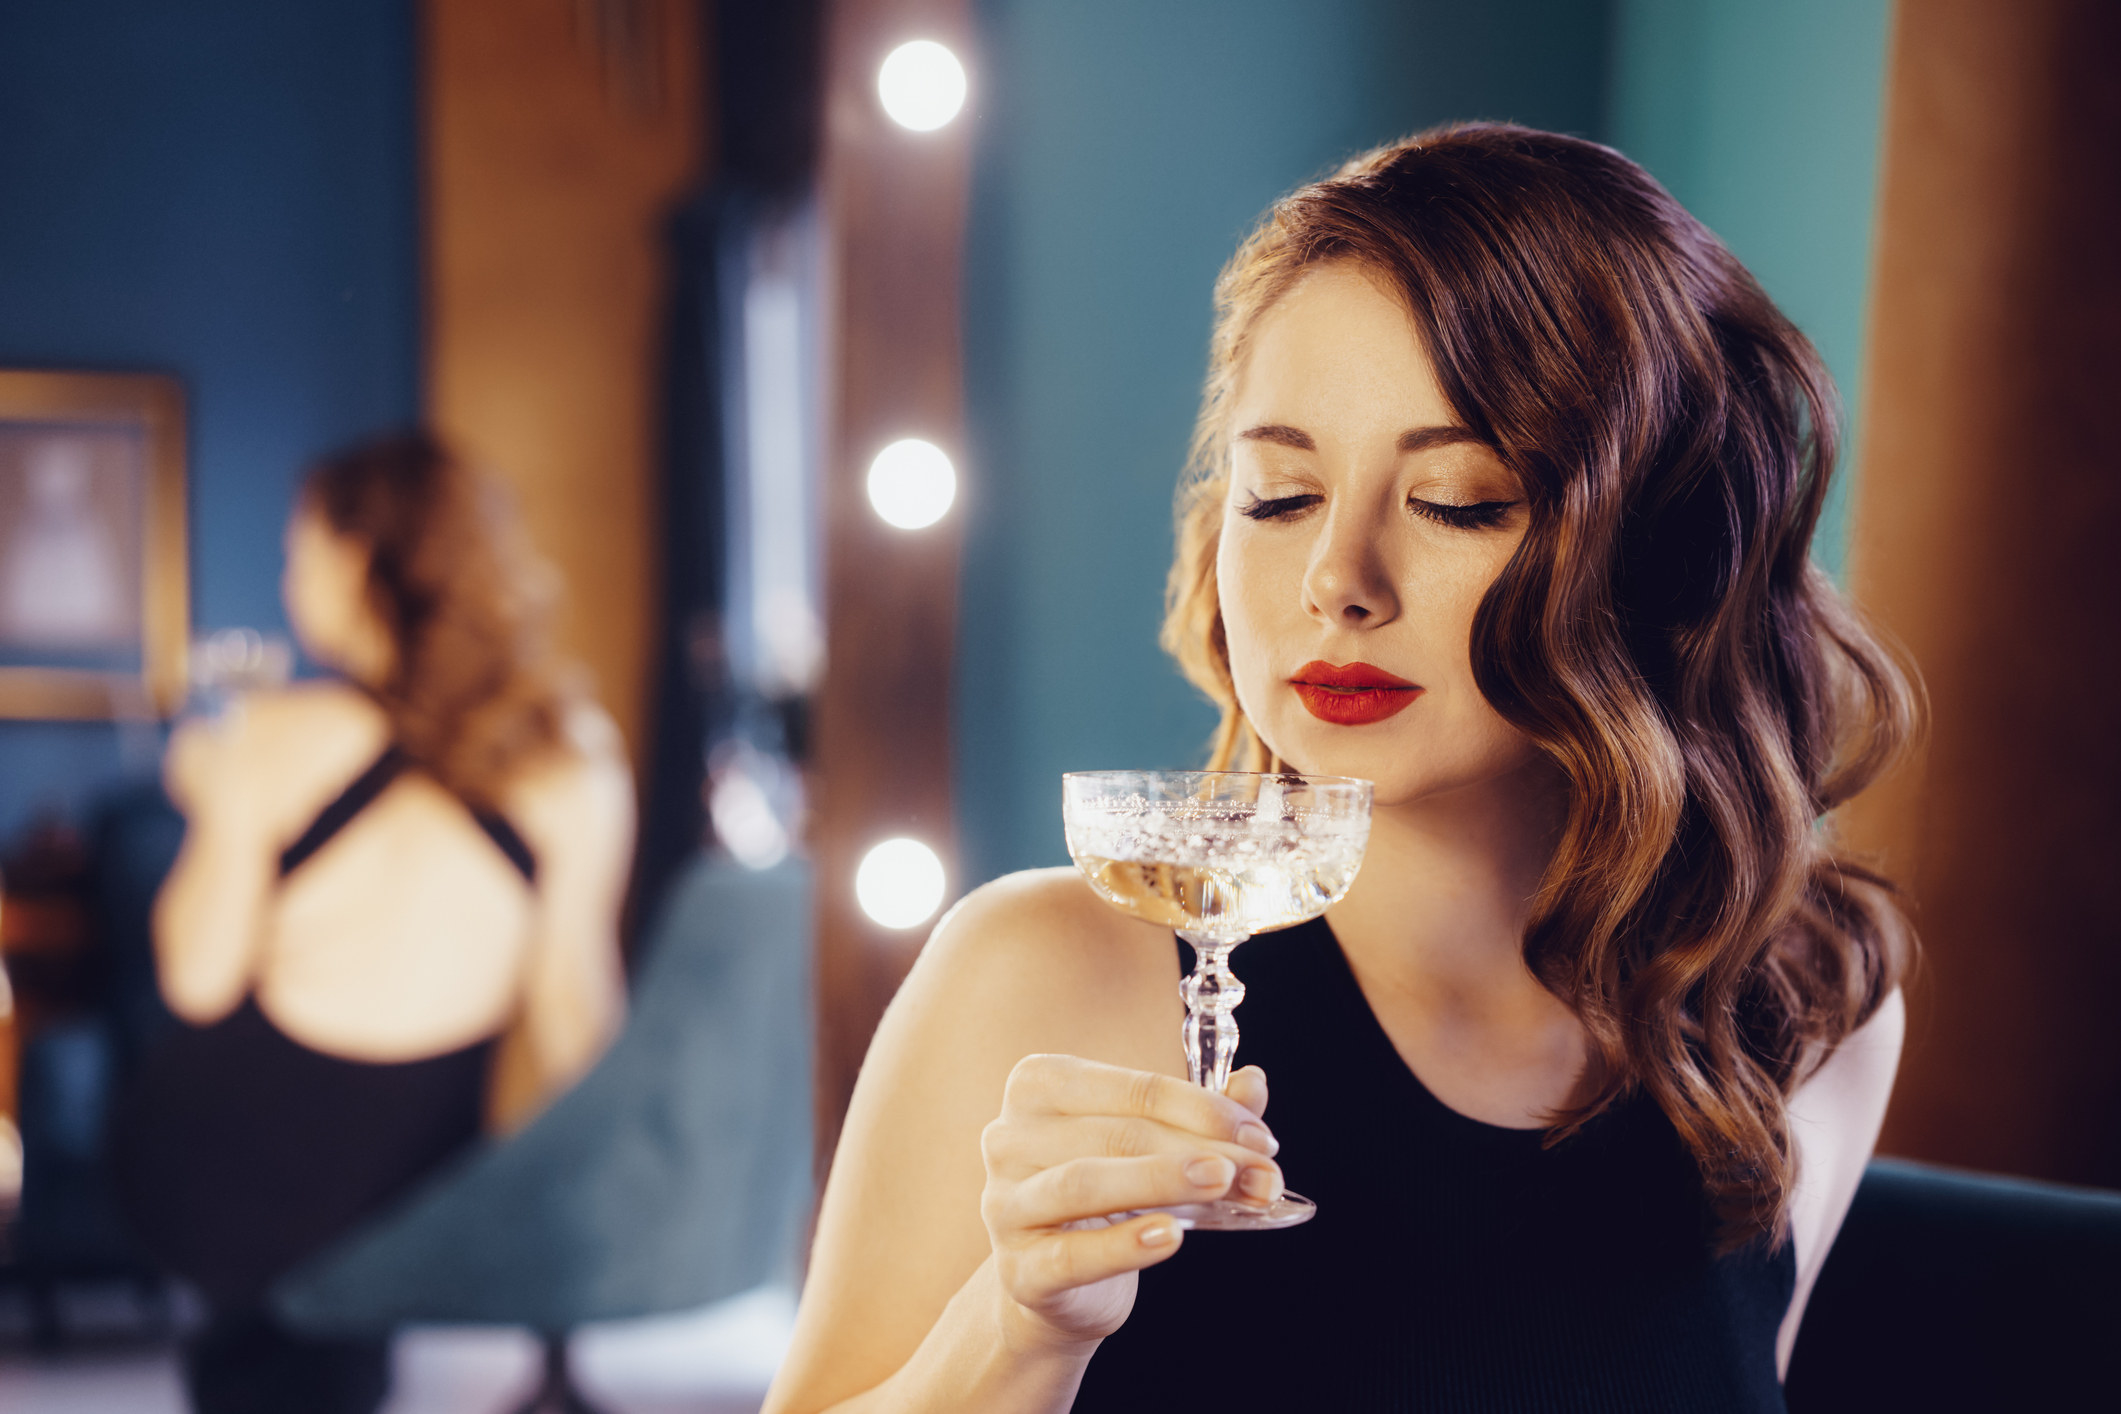 A young woman sipping champagne from a glass